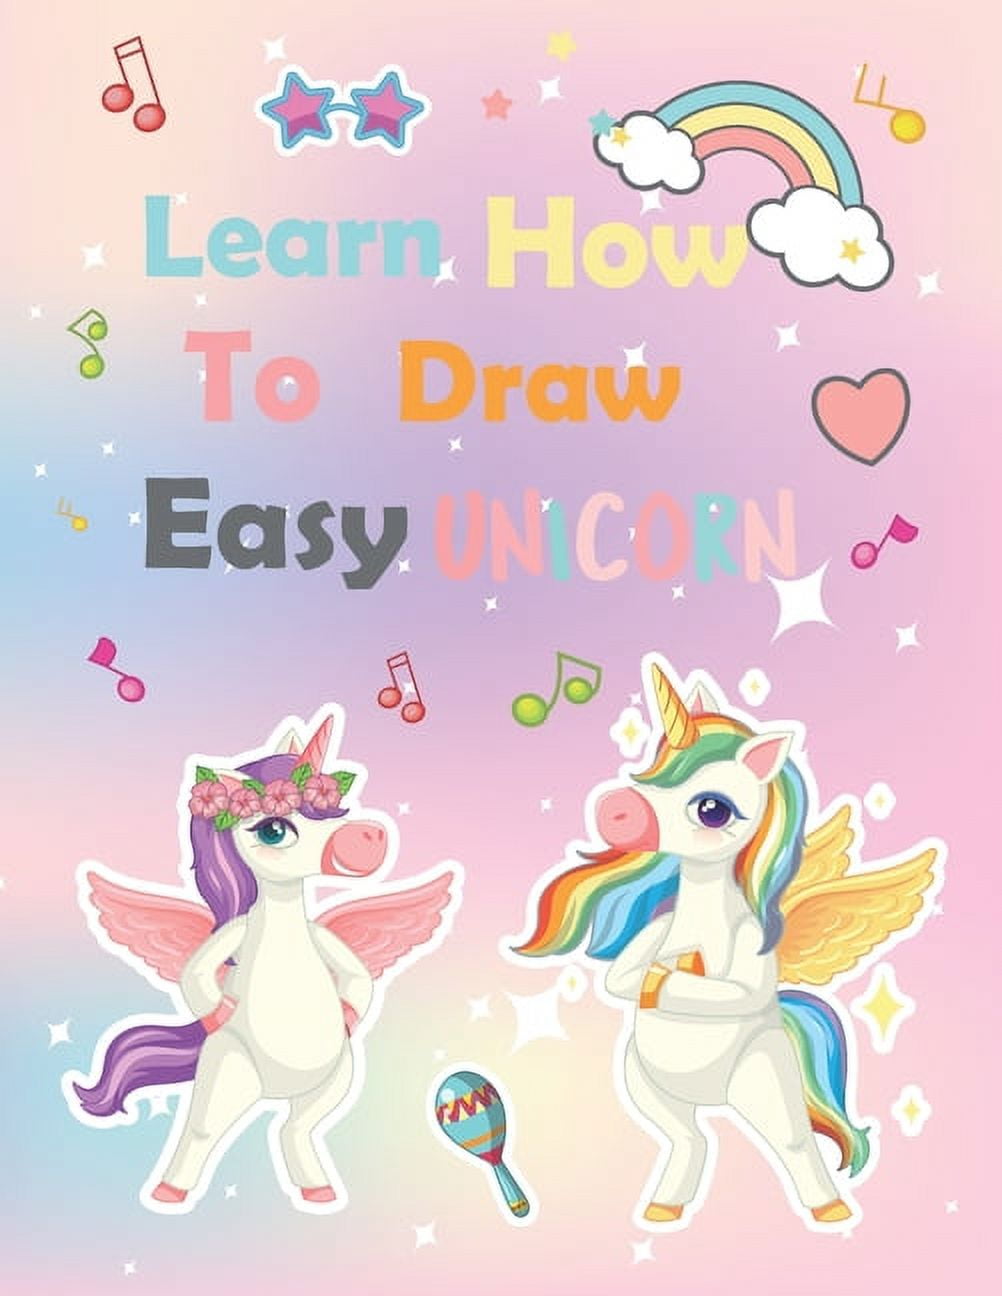 how to draw unicorn and animals: book contains 160 pages, learn step by  step drawing cute animals for kids age 4-8, 8-12, Simple Shapes with guides  (Paperback)